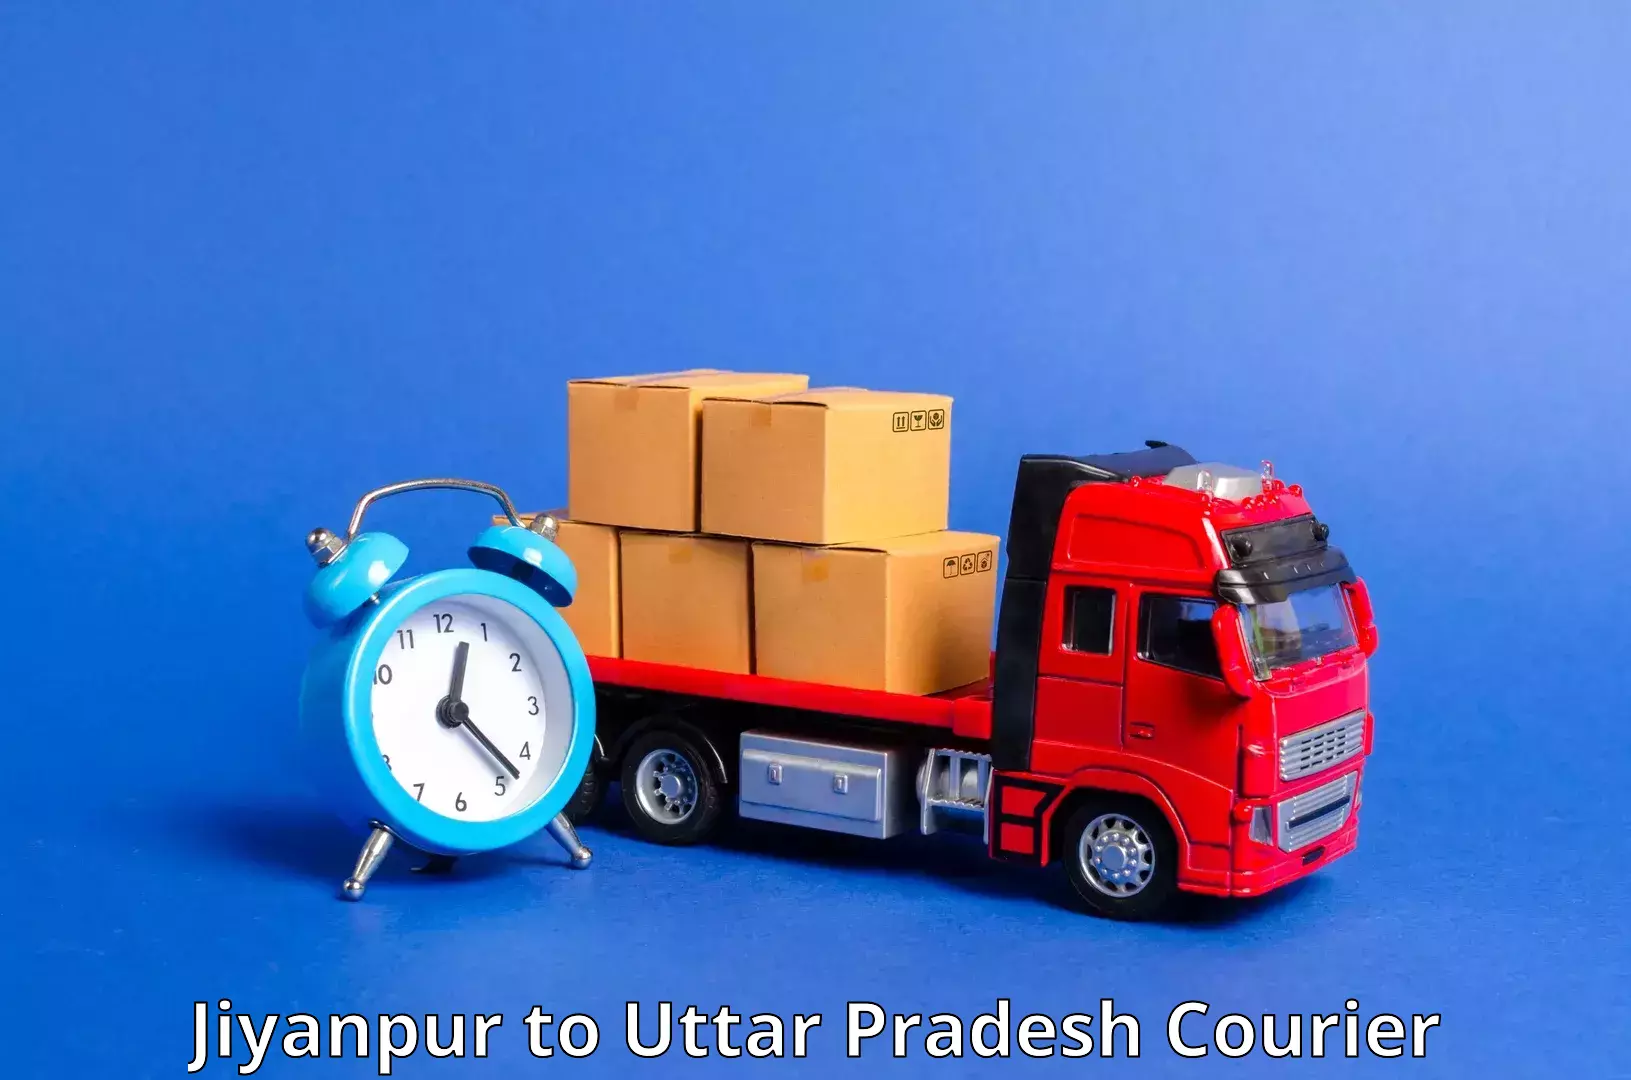 Global shipping solutions Jiyanpur to IIT Kanpur